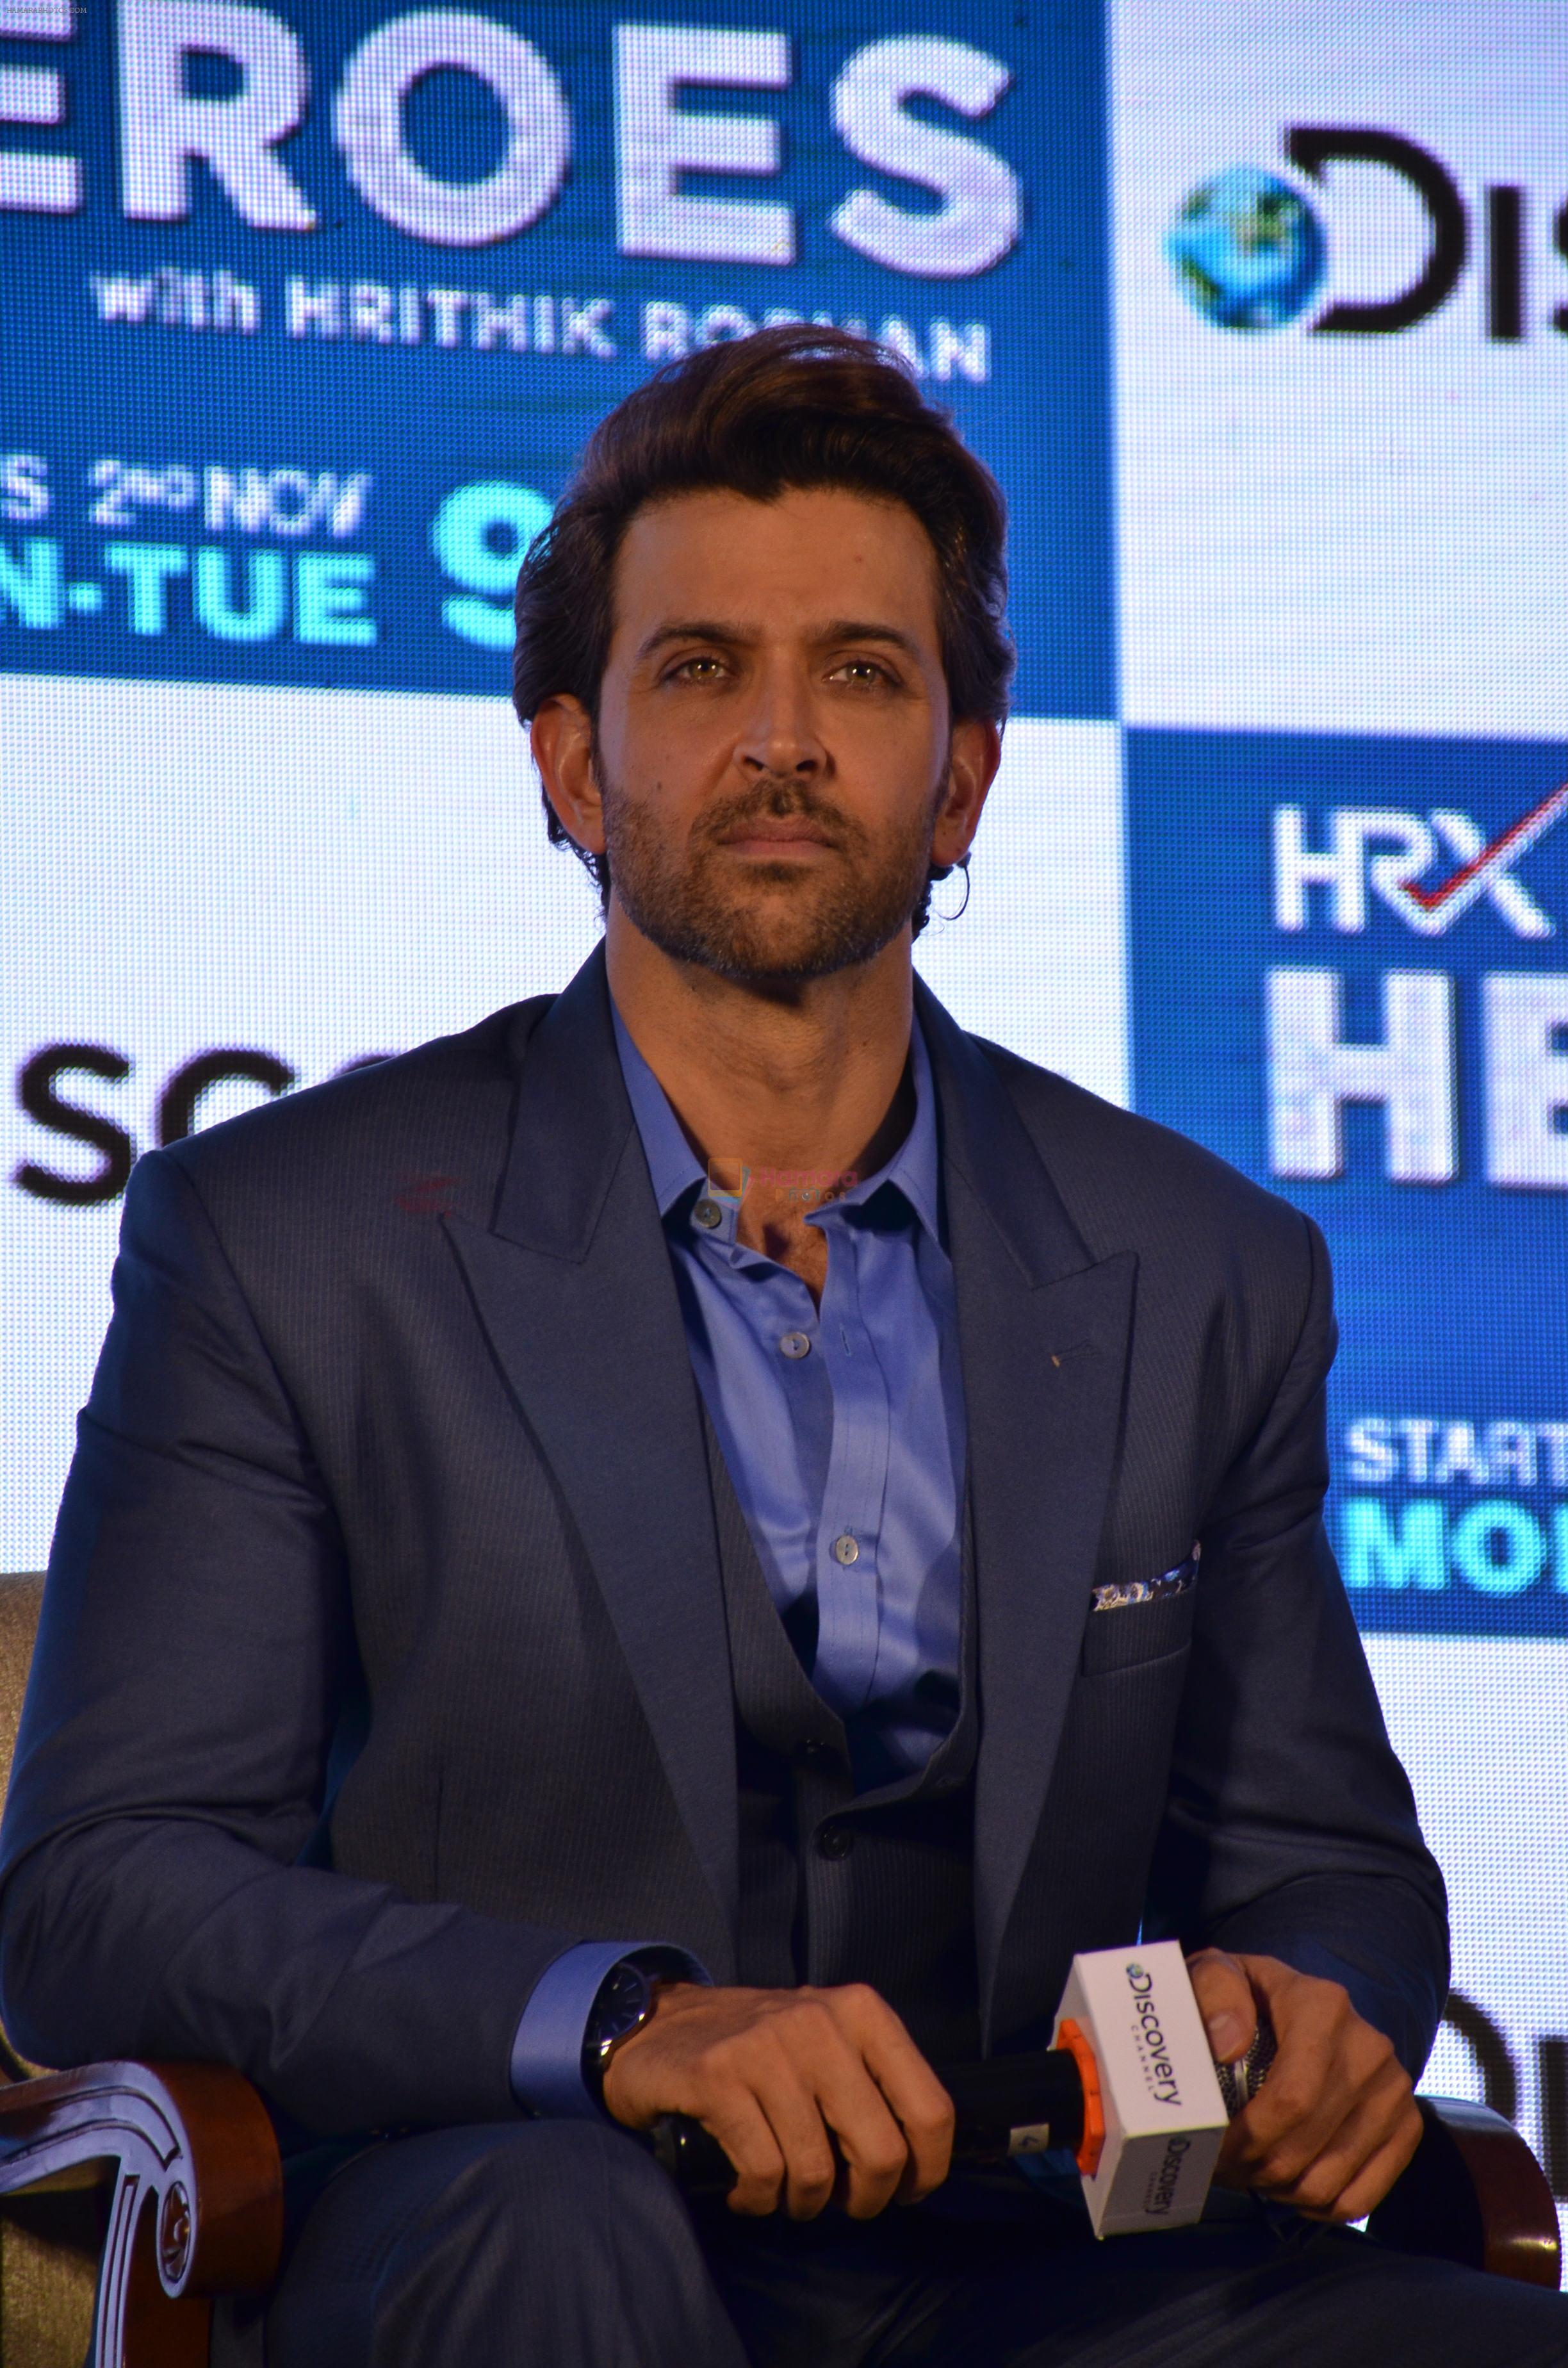 Hrithik roshan discover launch heroes on 23rd Oct 2015